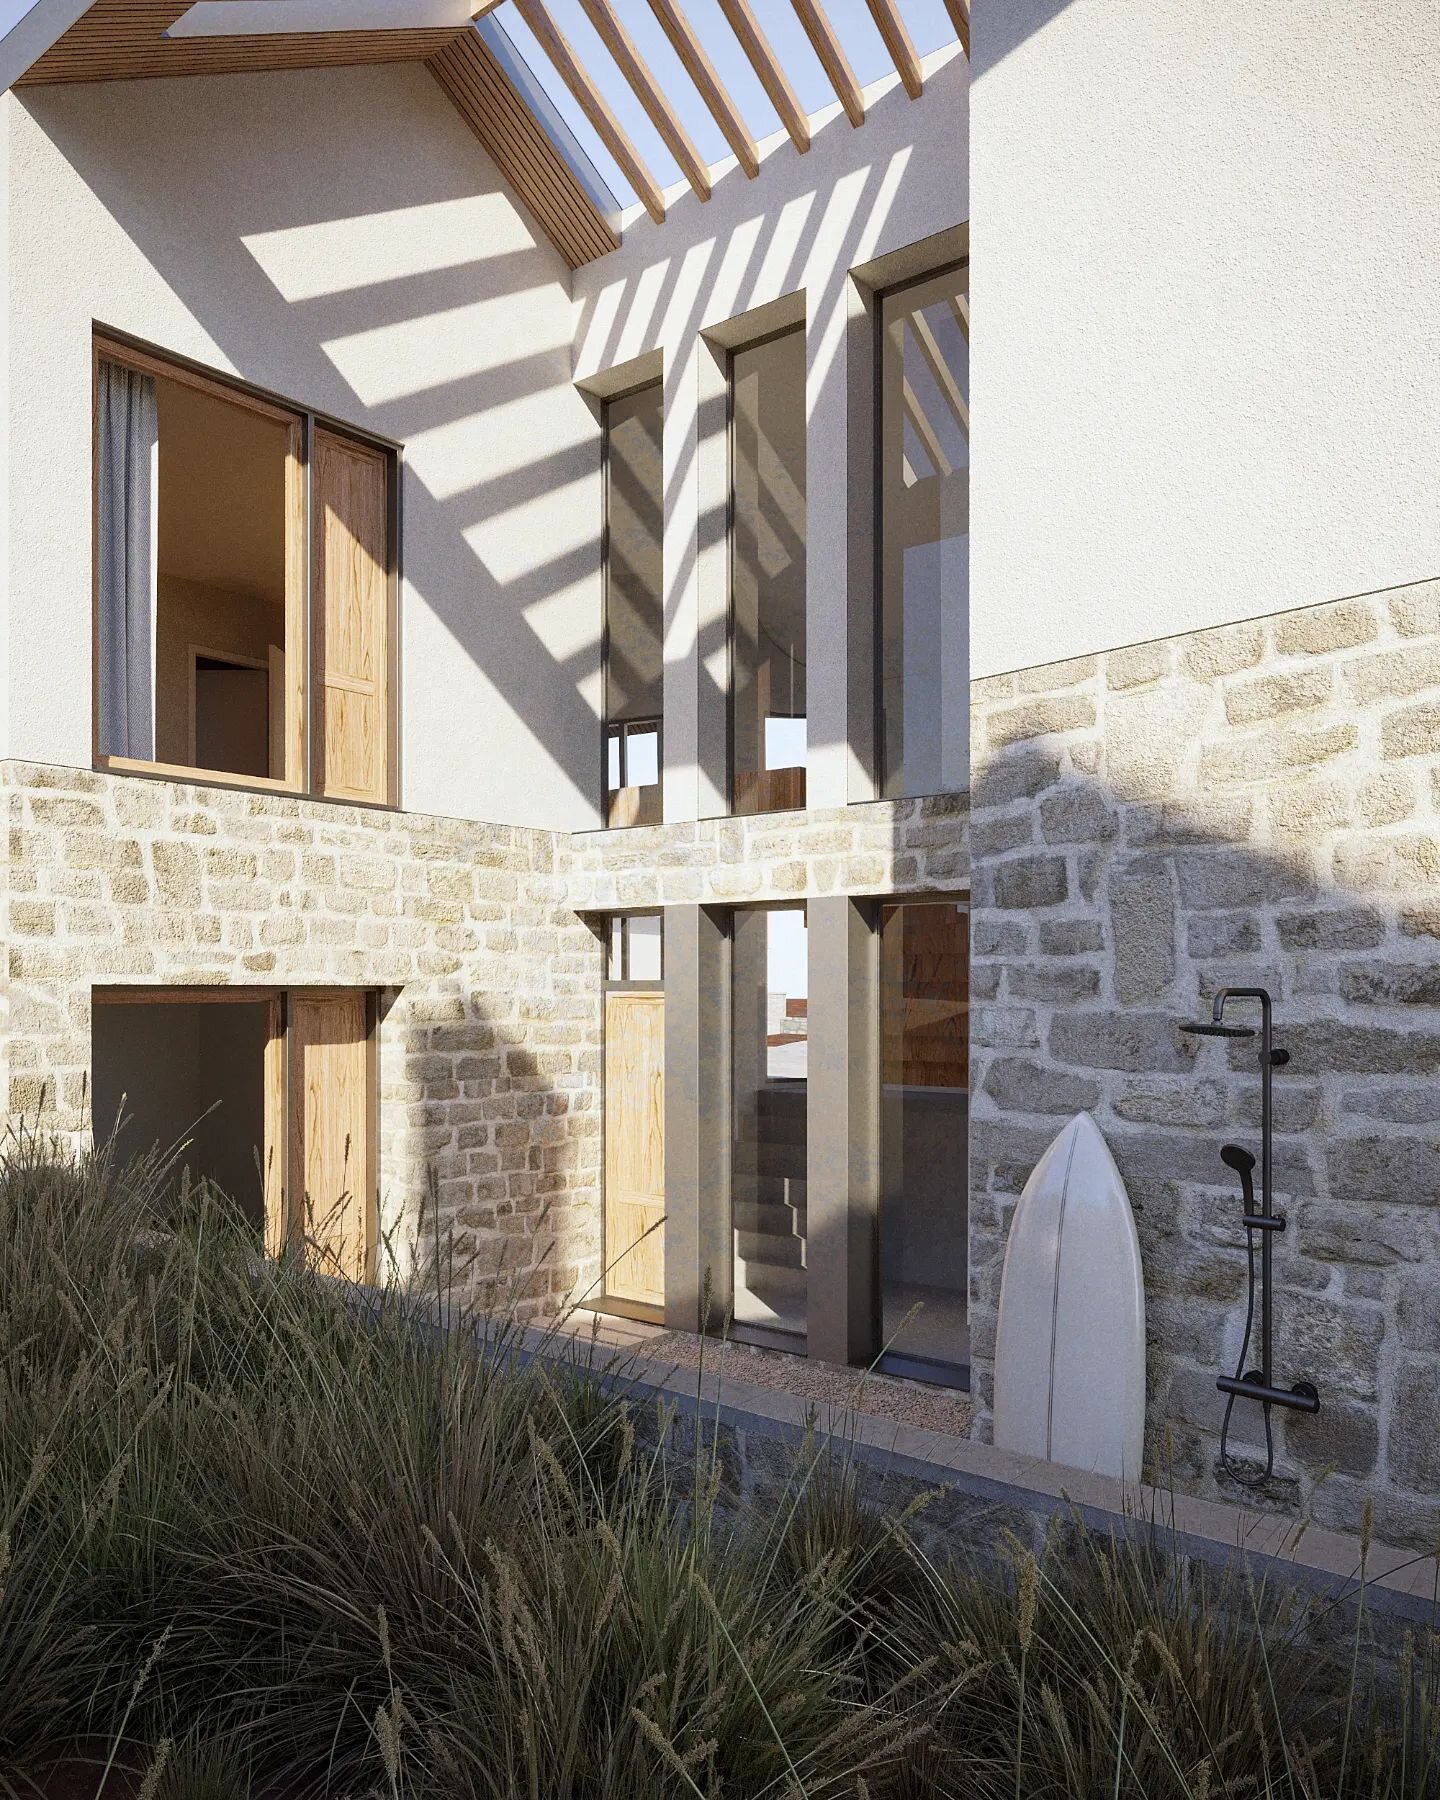 The development of this design was always led by proportions of the site. The long site required carefully positioned courtyards to form window aspect and allow light to flood the middle section of the house. This courtyard provides a secondary entra